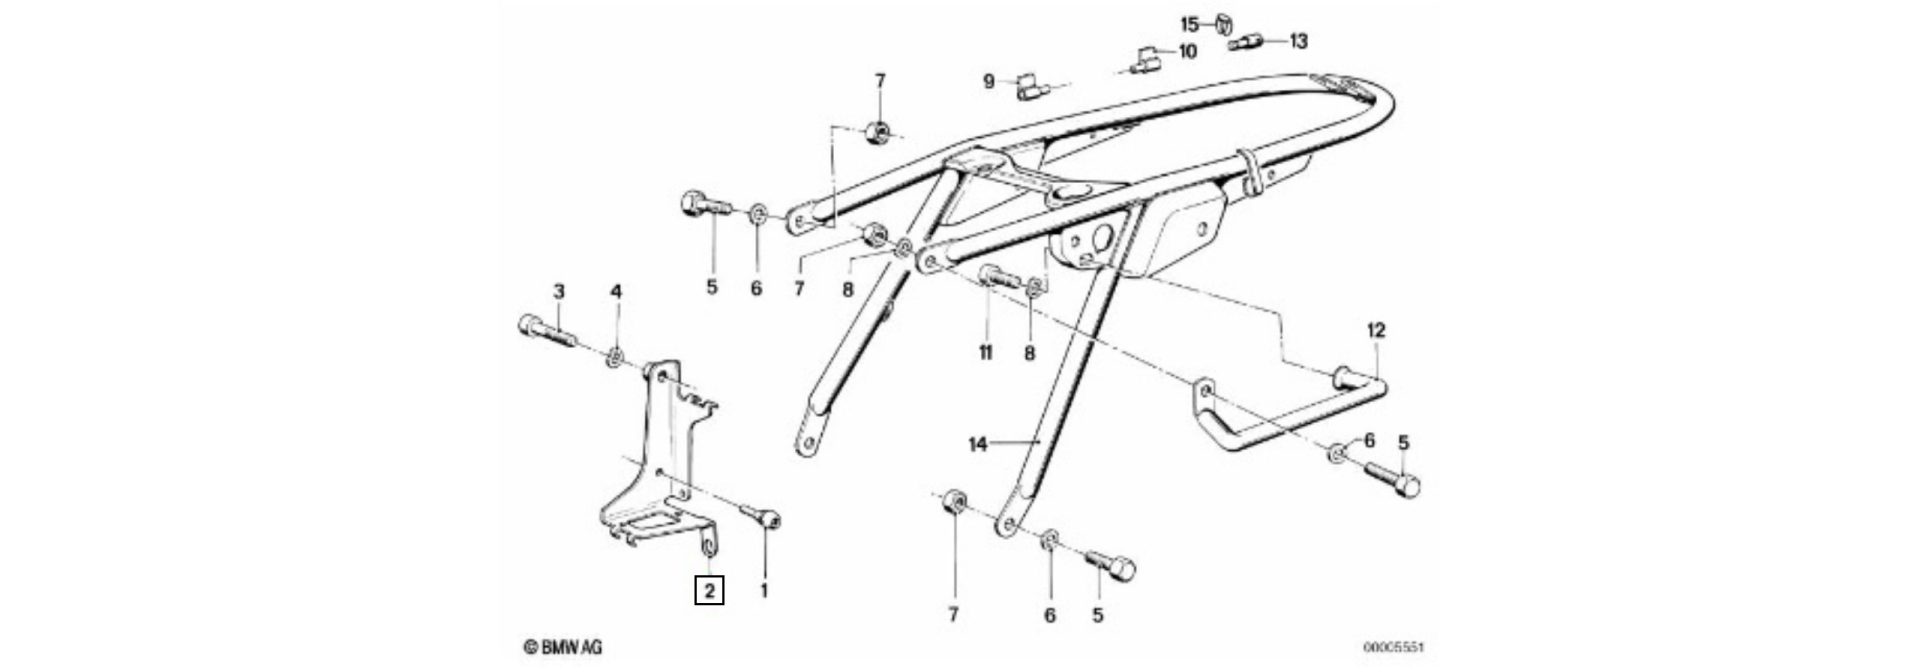 Exploded-view drawing battery tray